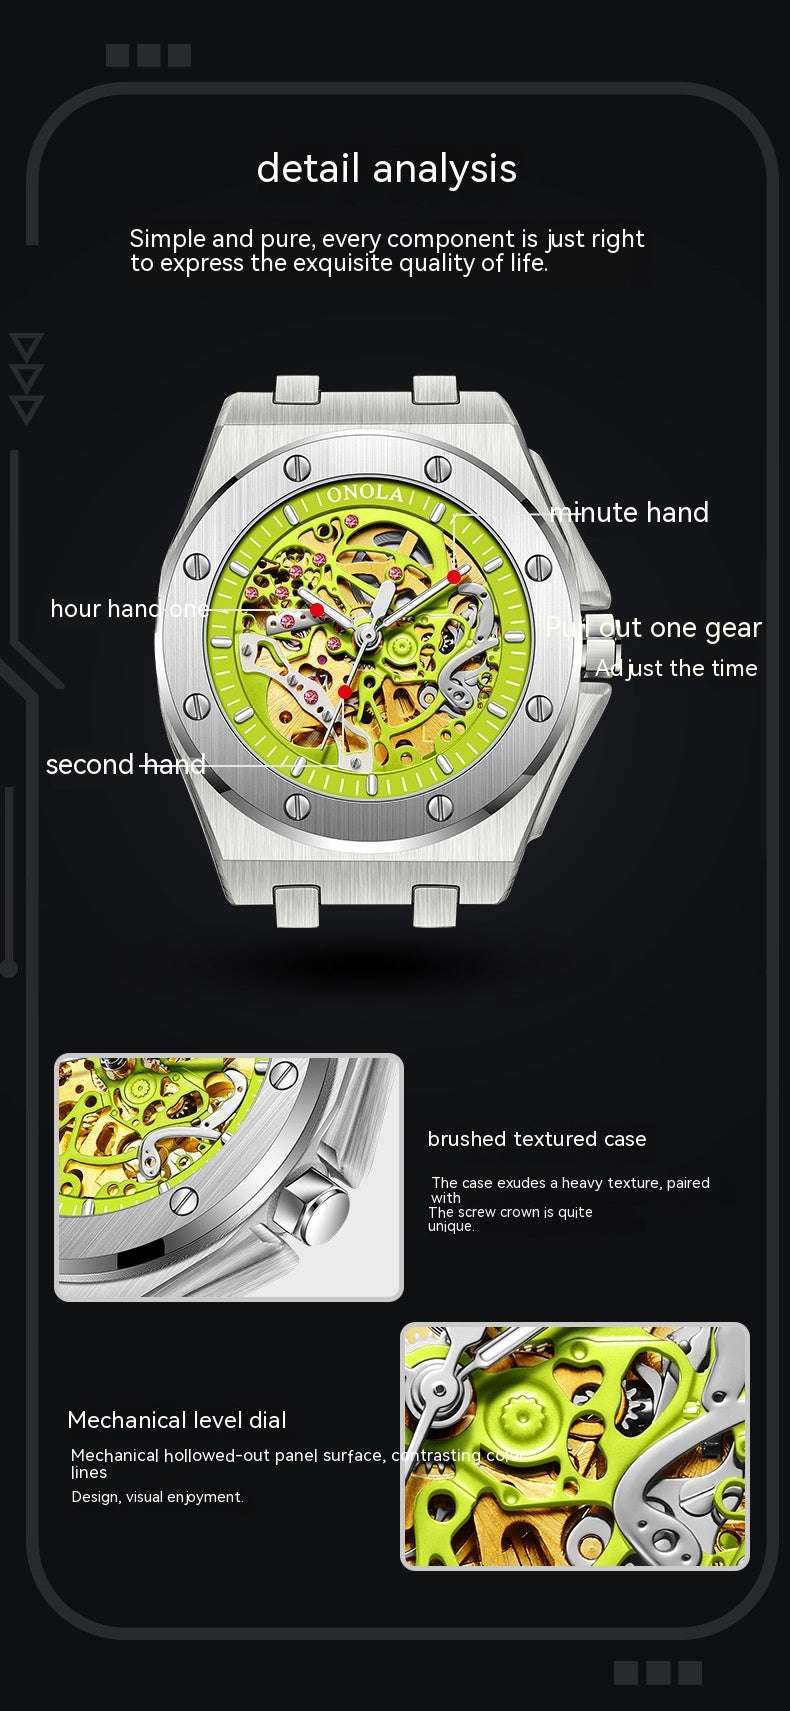 Men's Automatic Watch, Silicone Band Watch, Waterproof Mechanical Watch - available at Sparq Mart